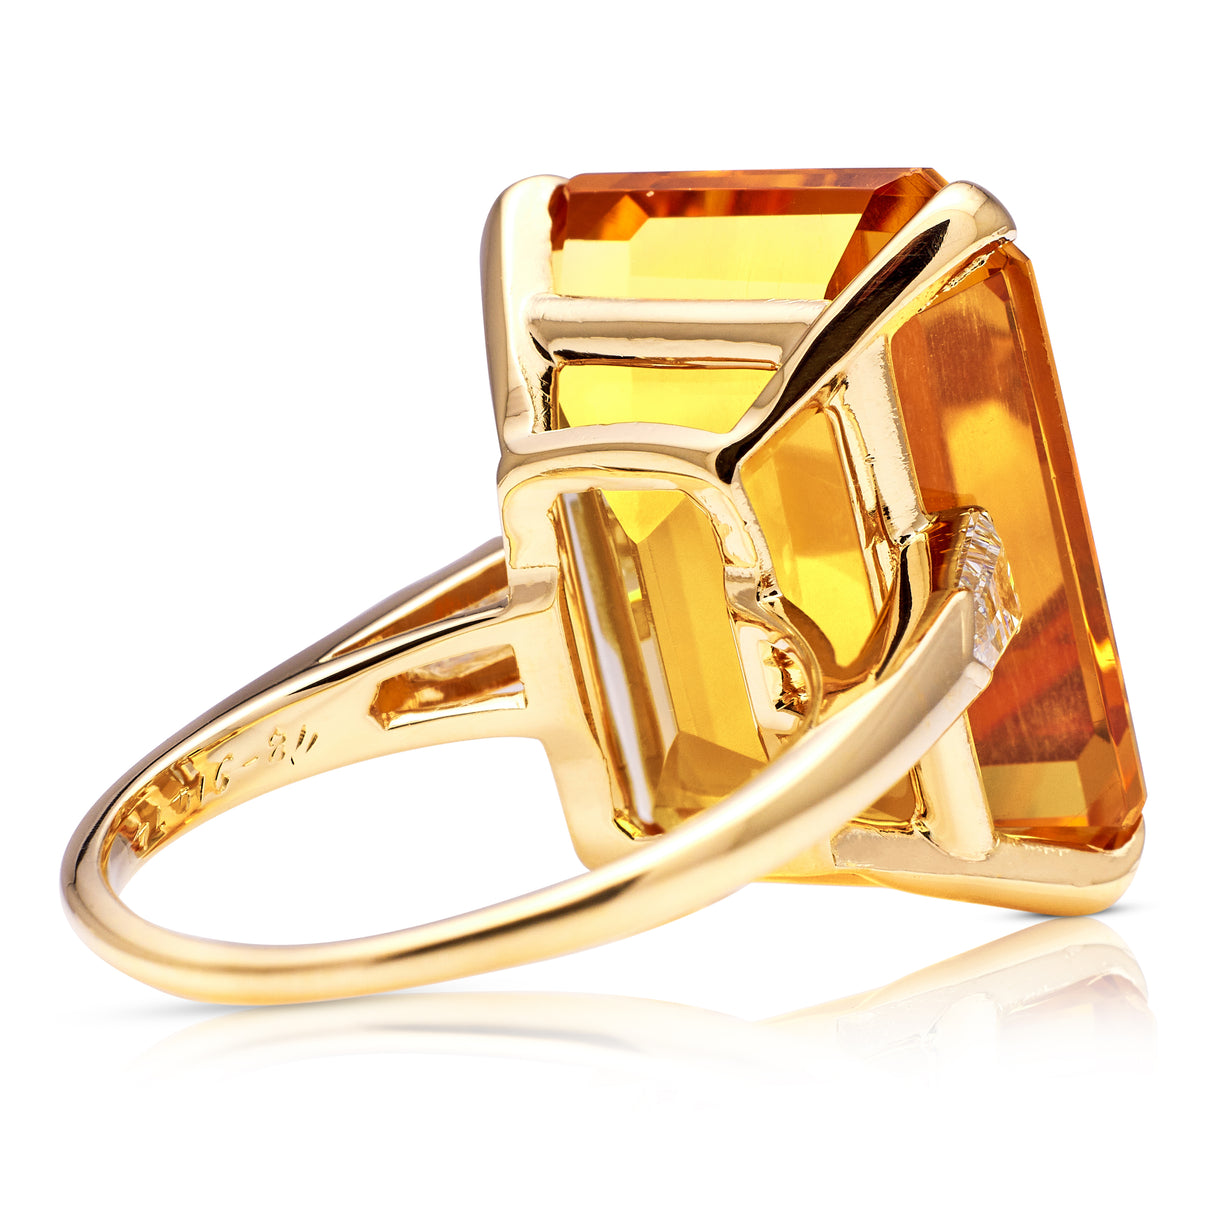 Vintage, Cartier Citrine Cocktail Ring, 18ct Yellow Gold. Back